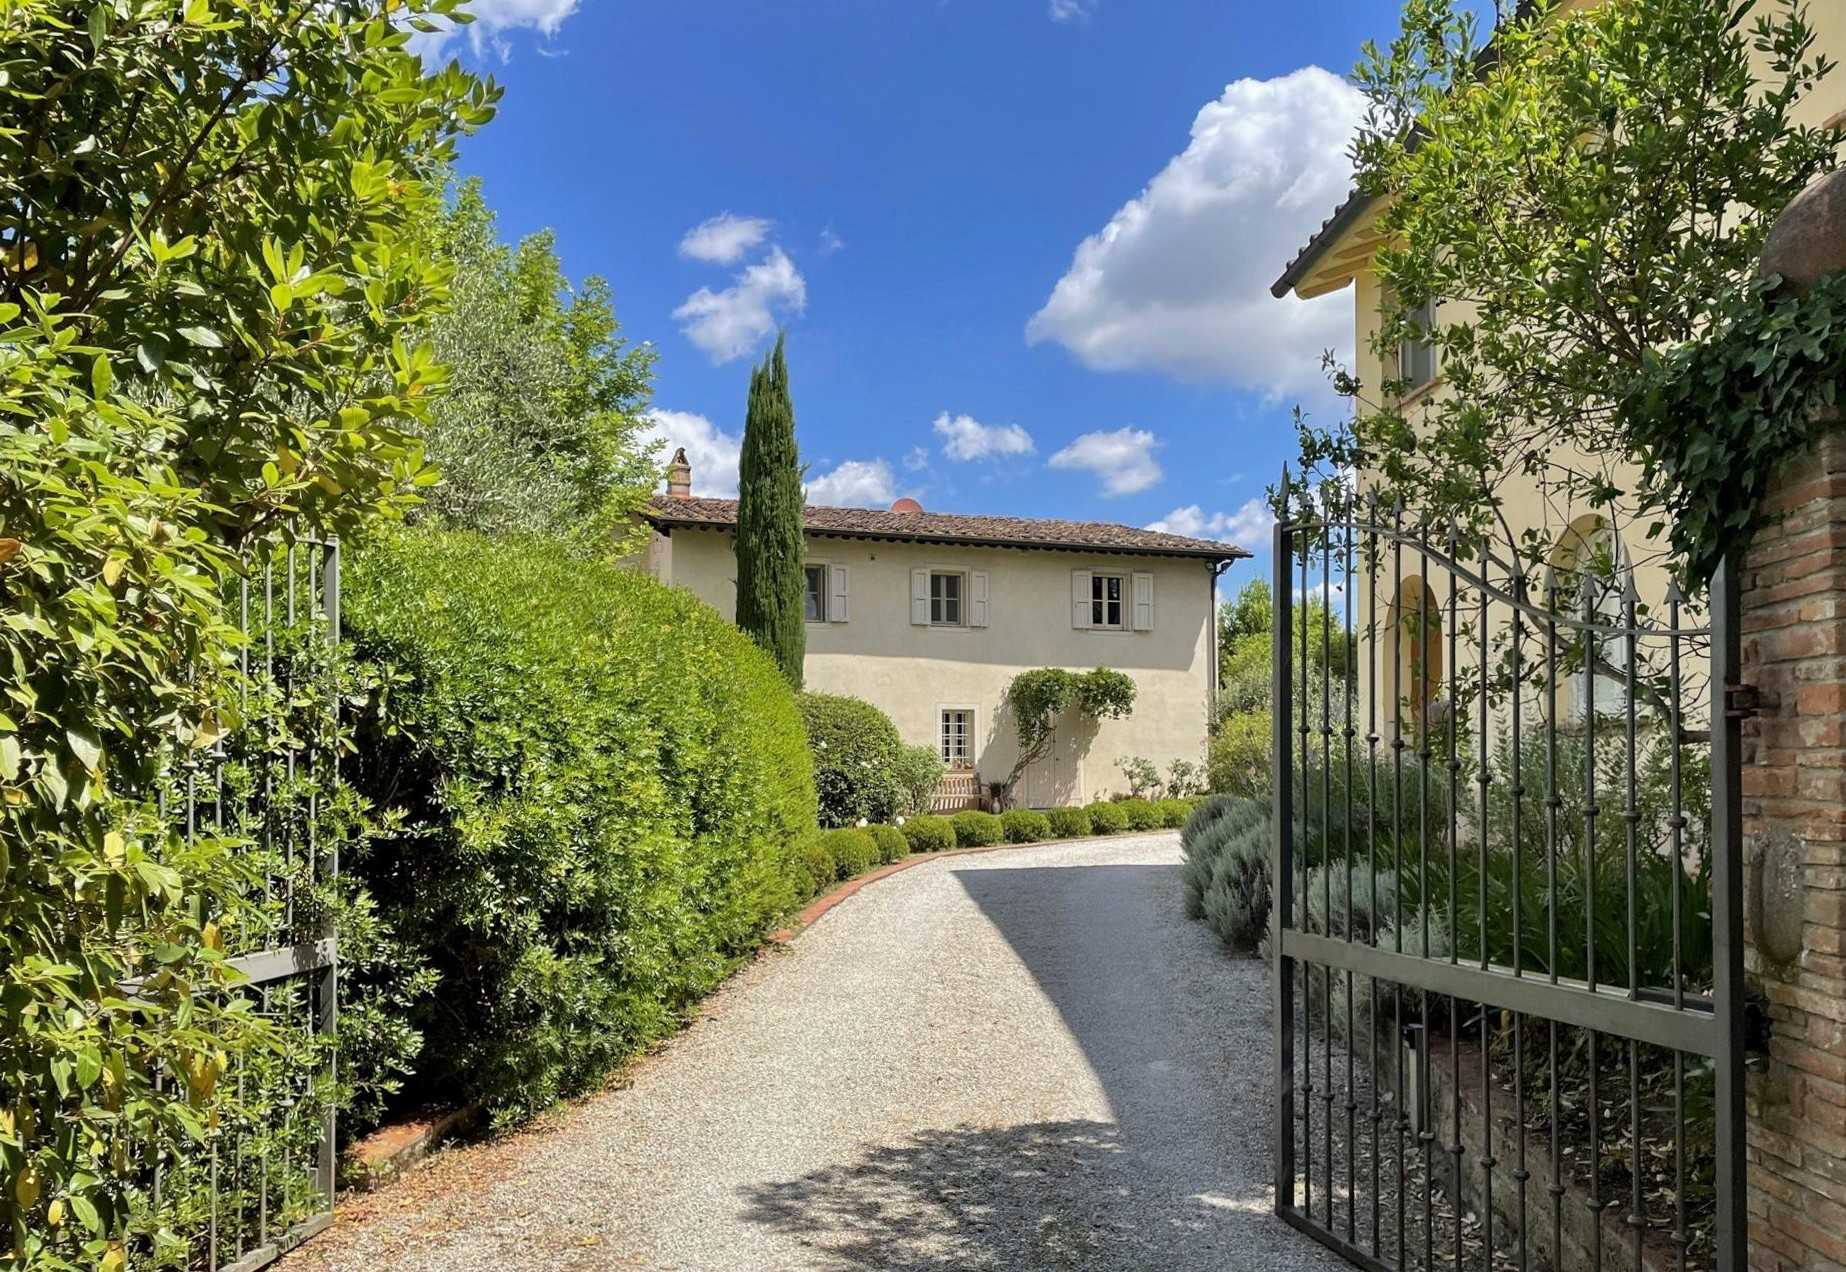 Photos Villa with outbuildings and 7 hectares of land between Pisa and Florence